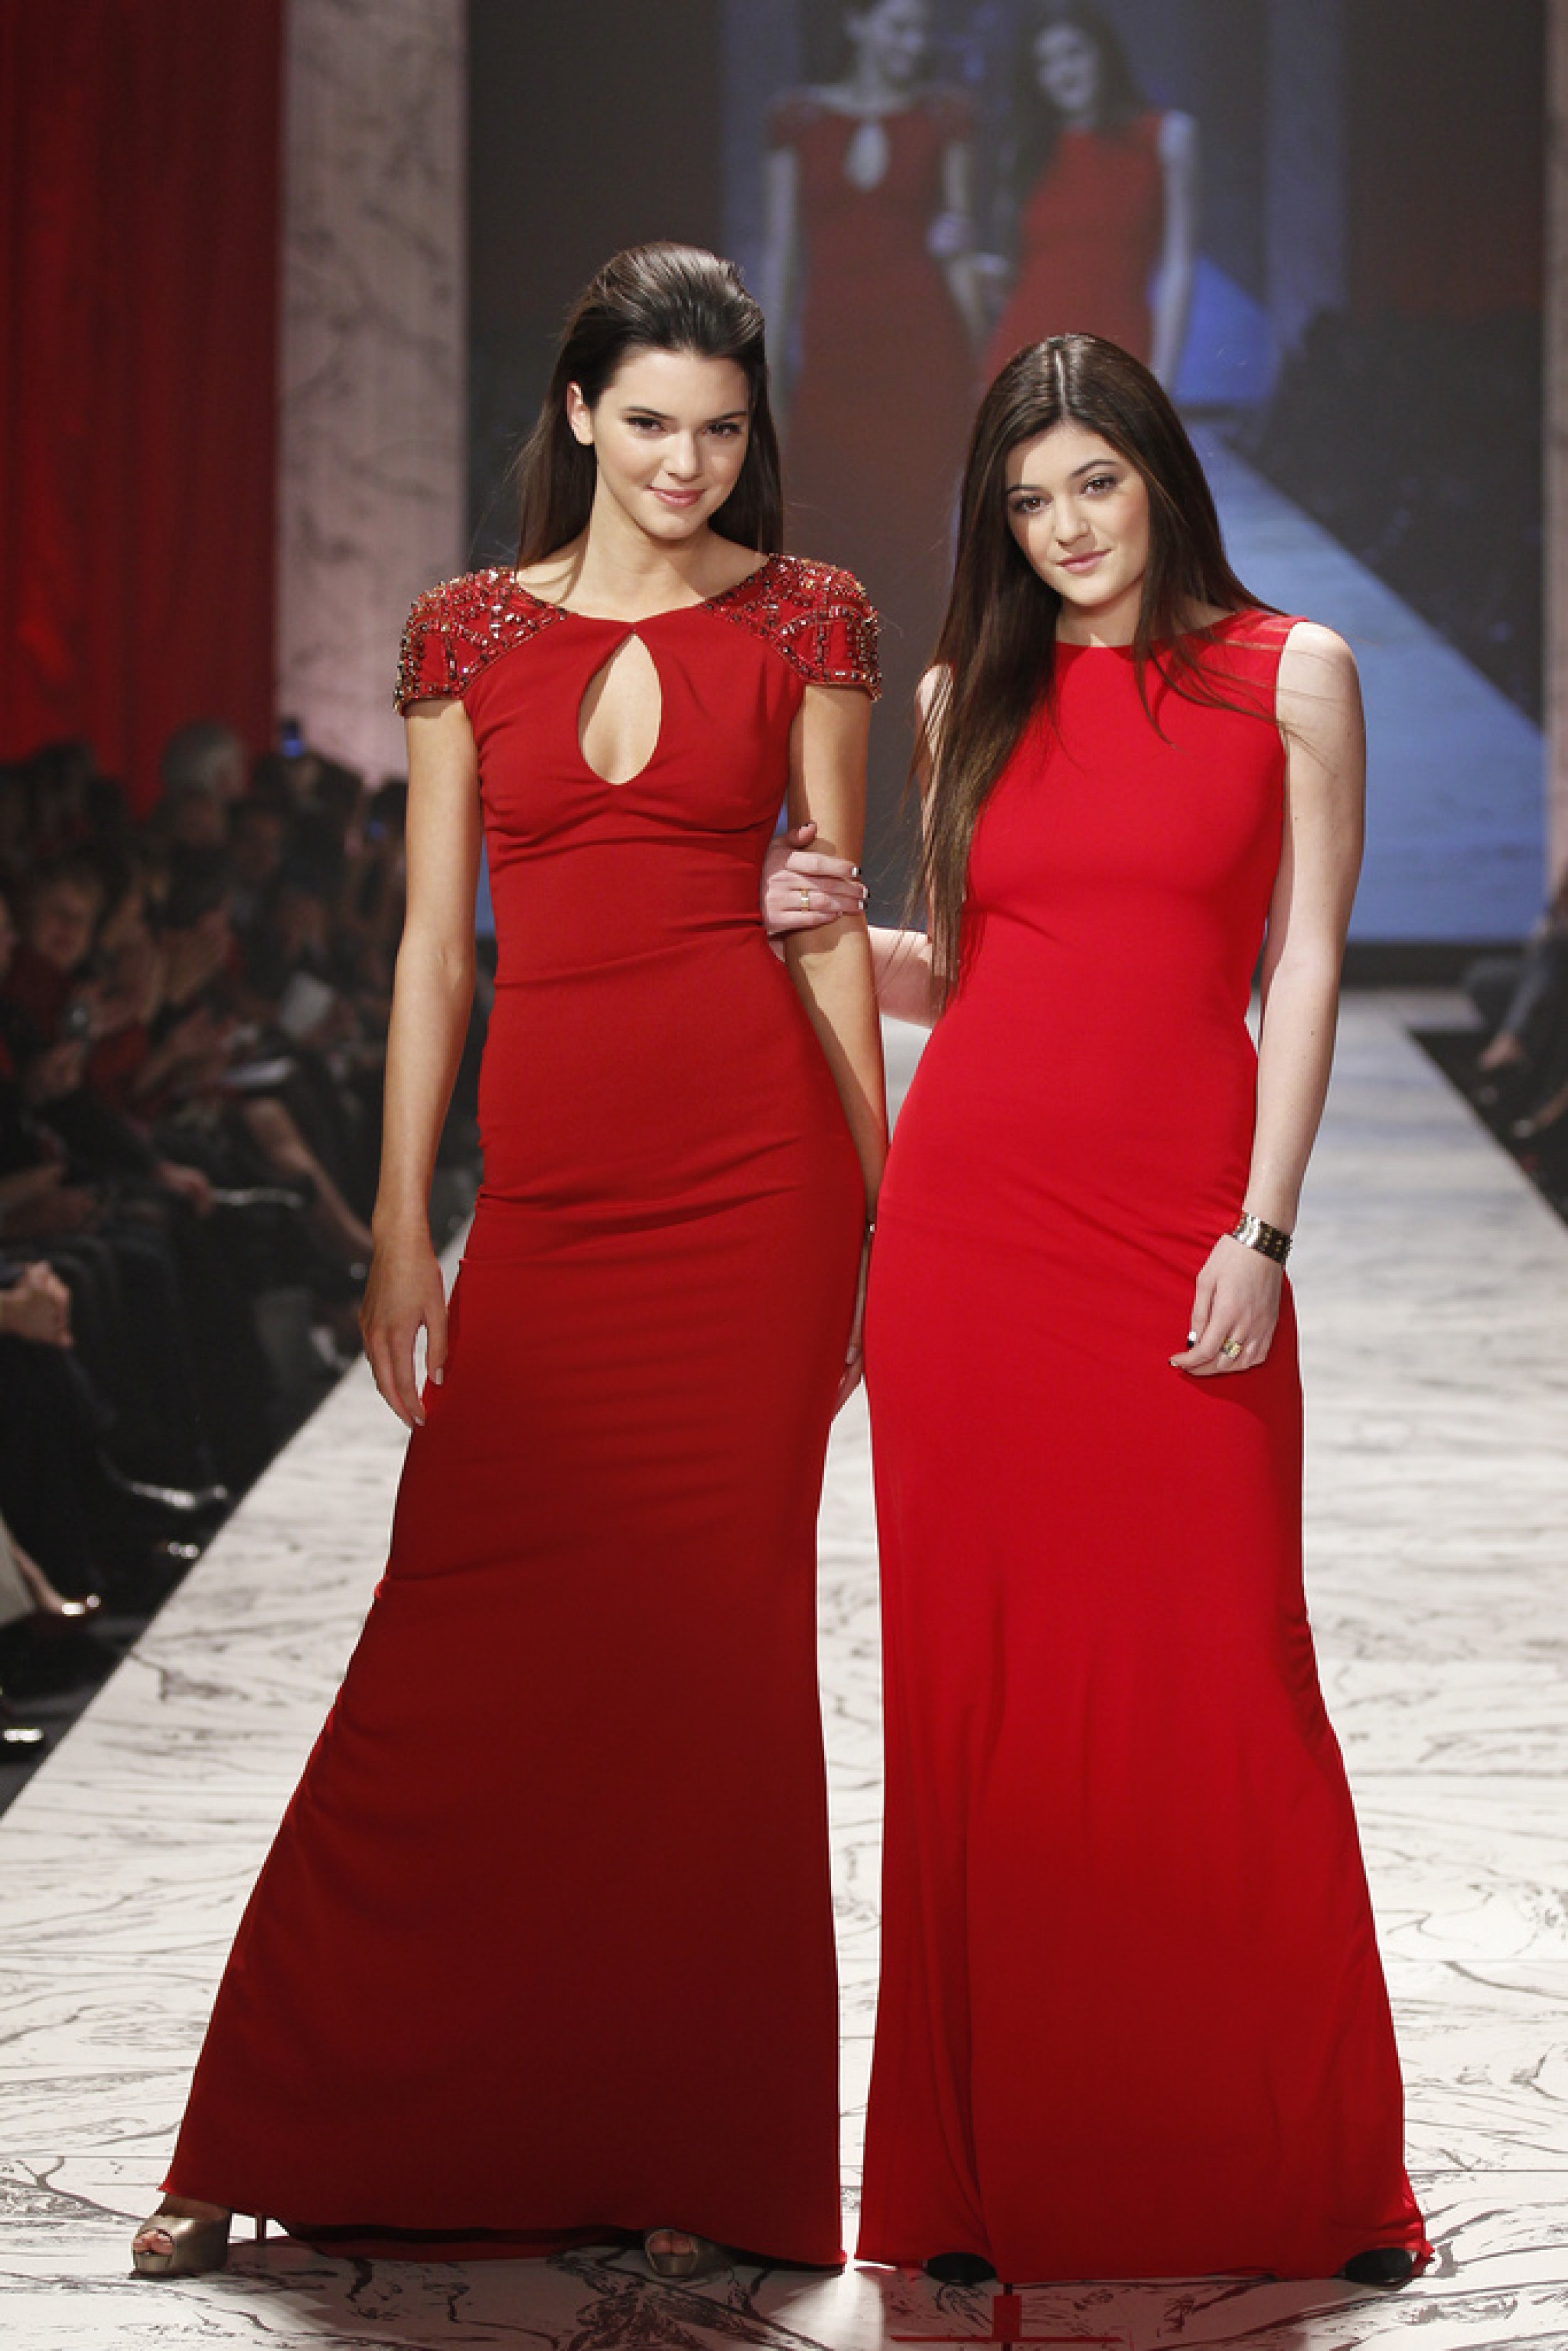 Kendall and Kylie Jenner in Badgley Mischka